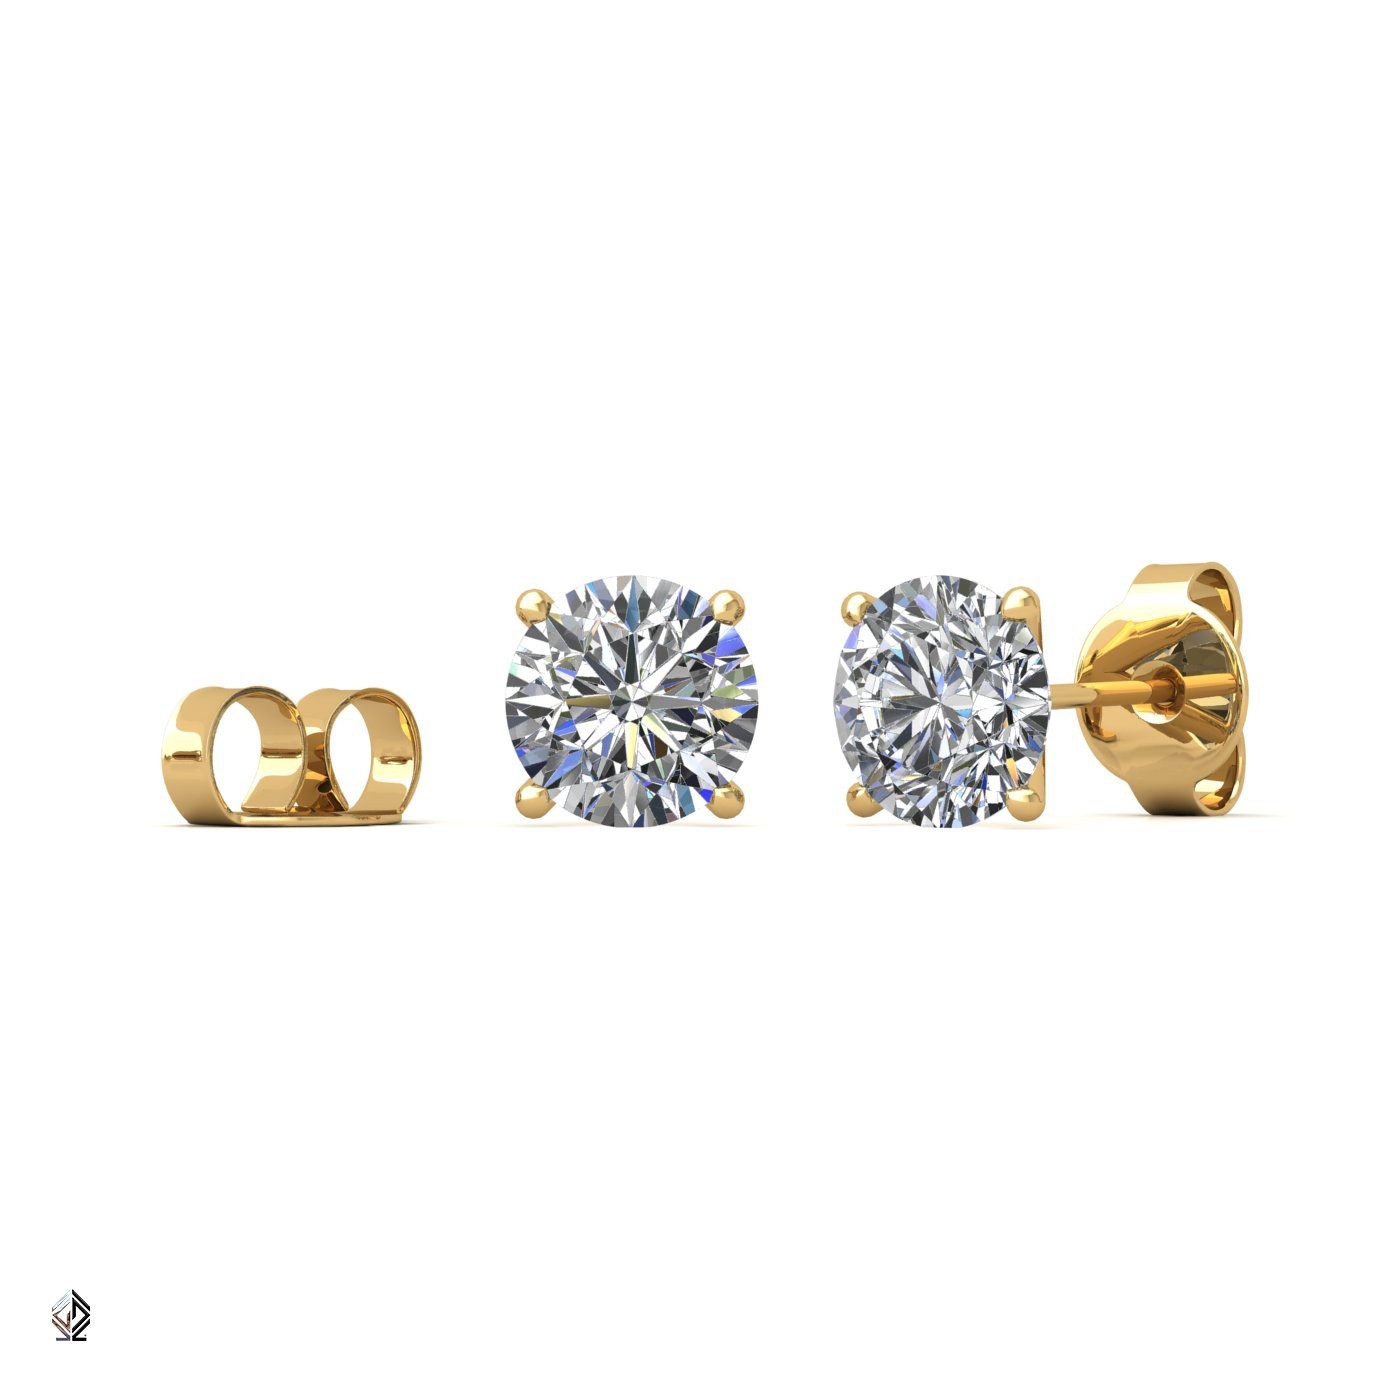 18k yellow gold 1.0 ct 4 prongs round cut classic diamond earring studs Photos & images